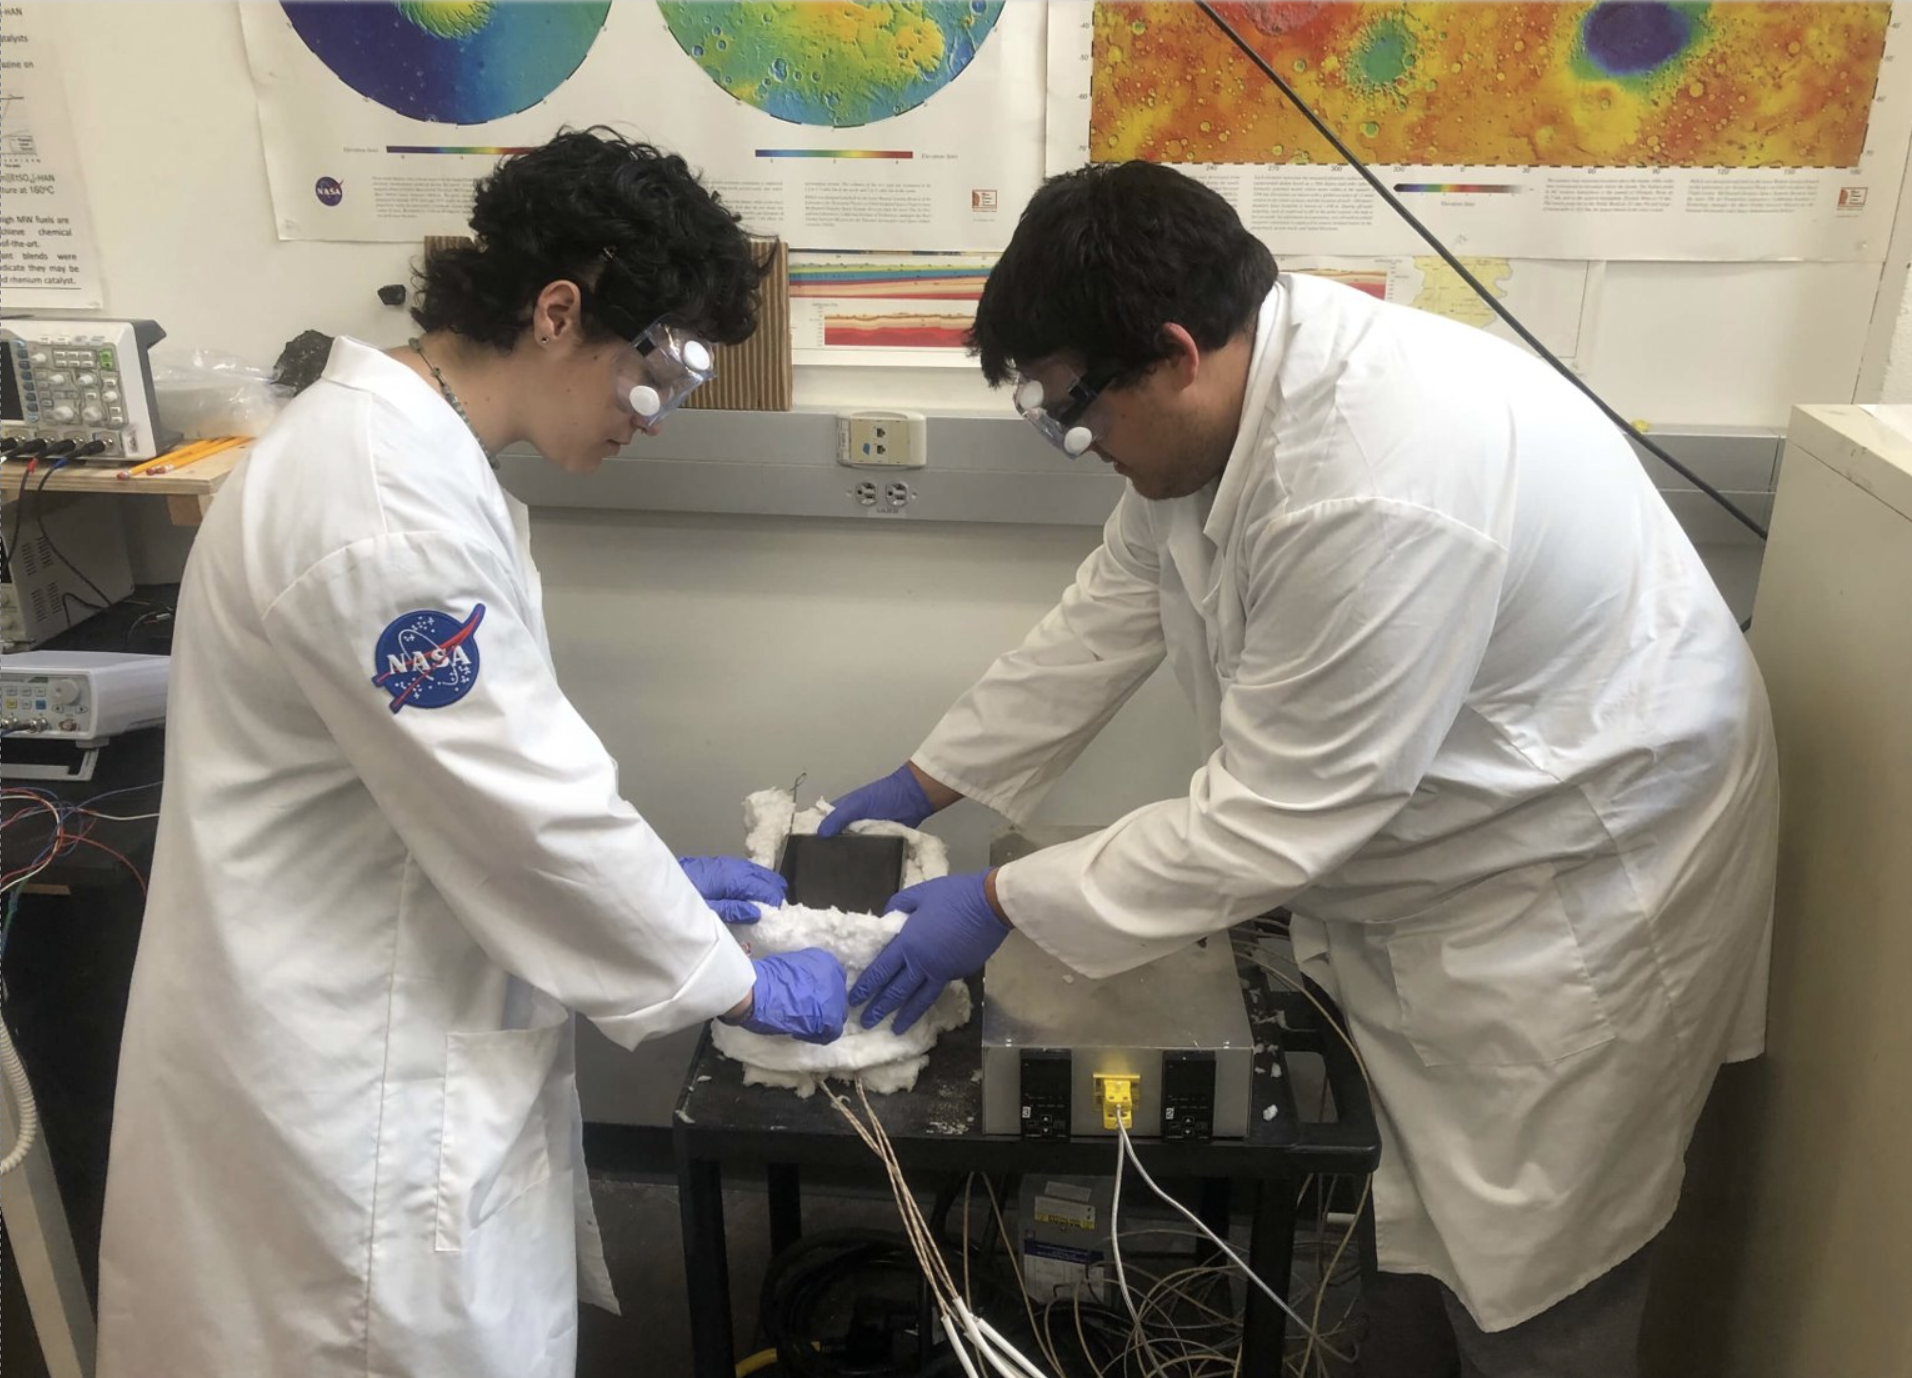 Missouri University of Science & Technology’s team members are shown working on their lunar forge project in the 2023 BIG Idea Challenge.